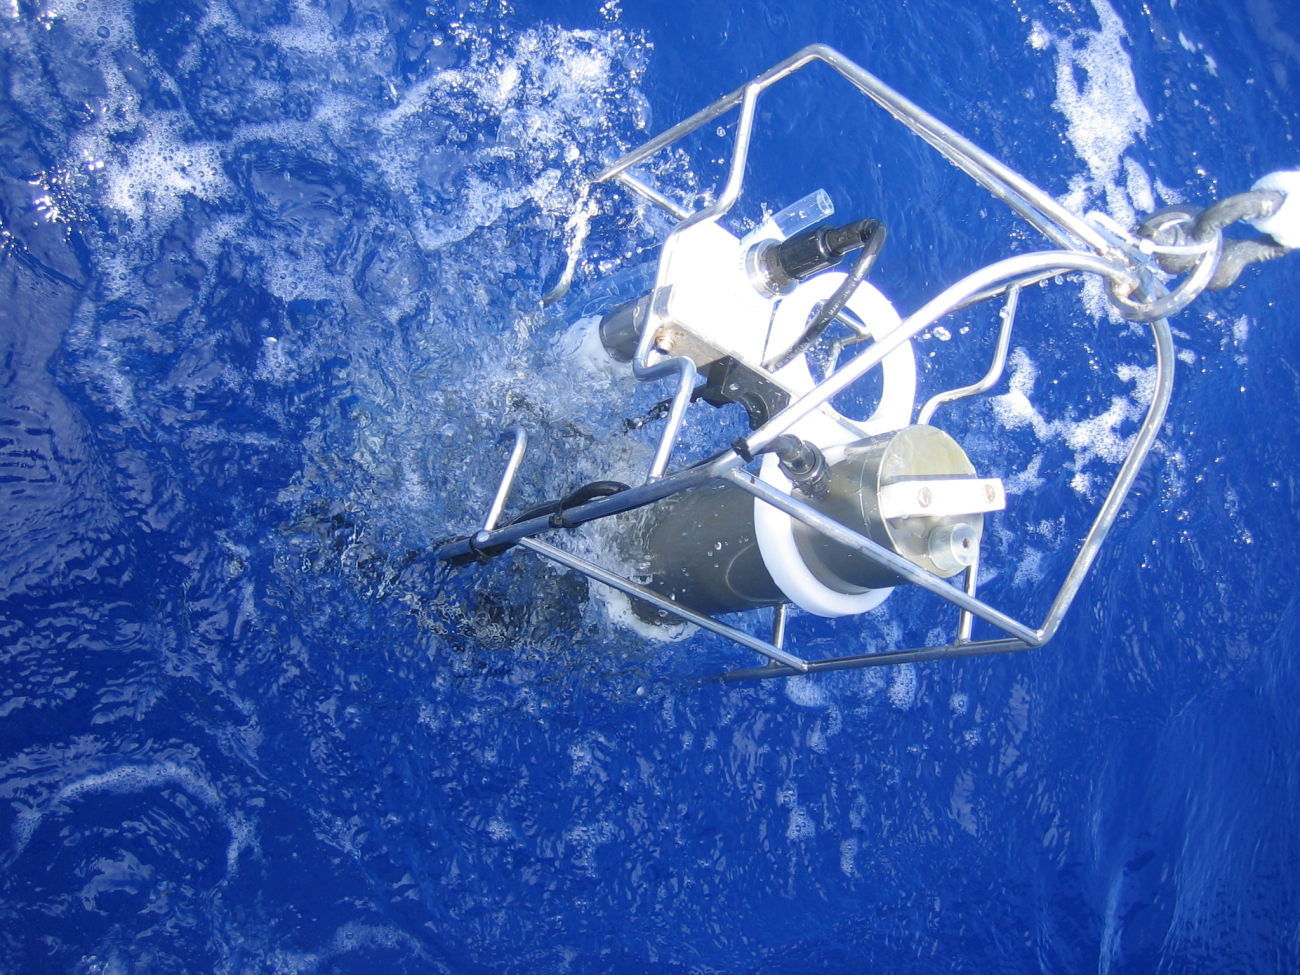 CTD equipment is being pulled up manually off the Mexican ship BIPduring a coastal oceanographic cruise off the waters of Xcalak between NOAAand ECOSUR